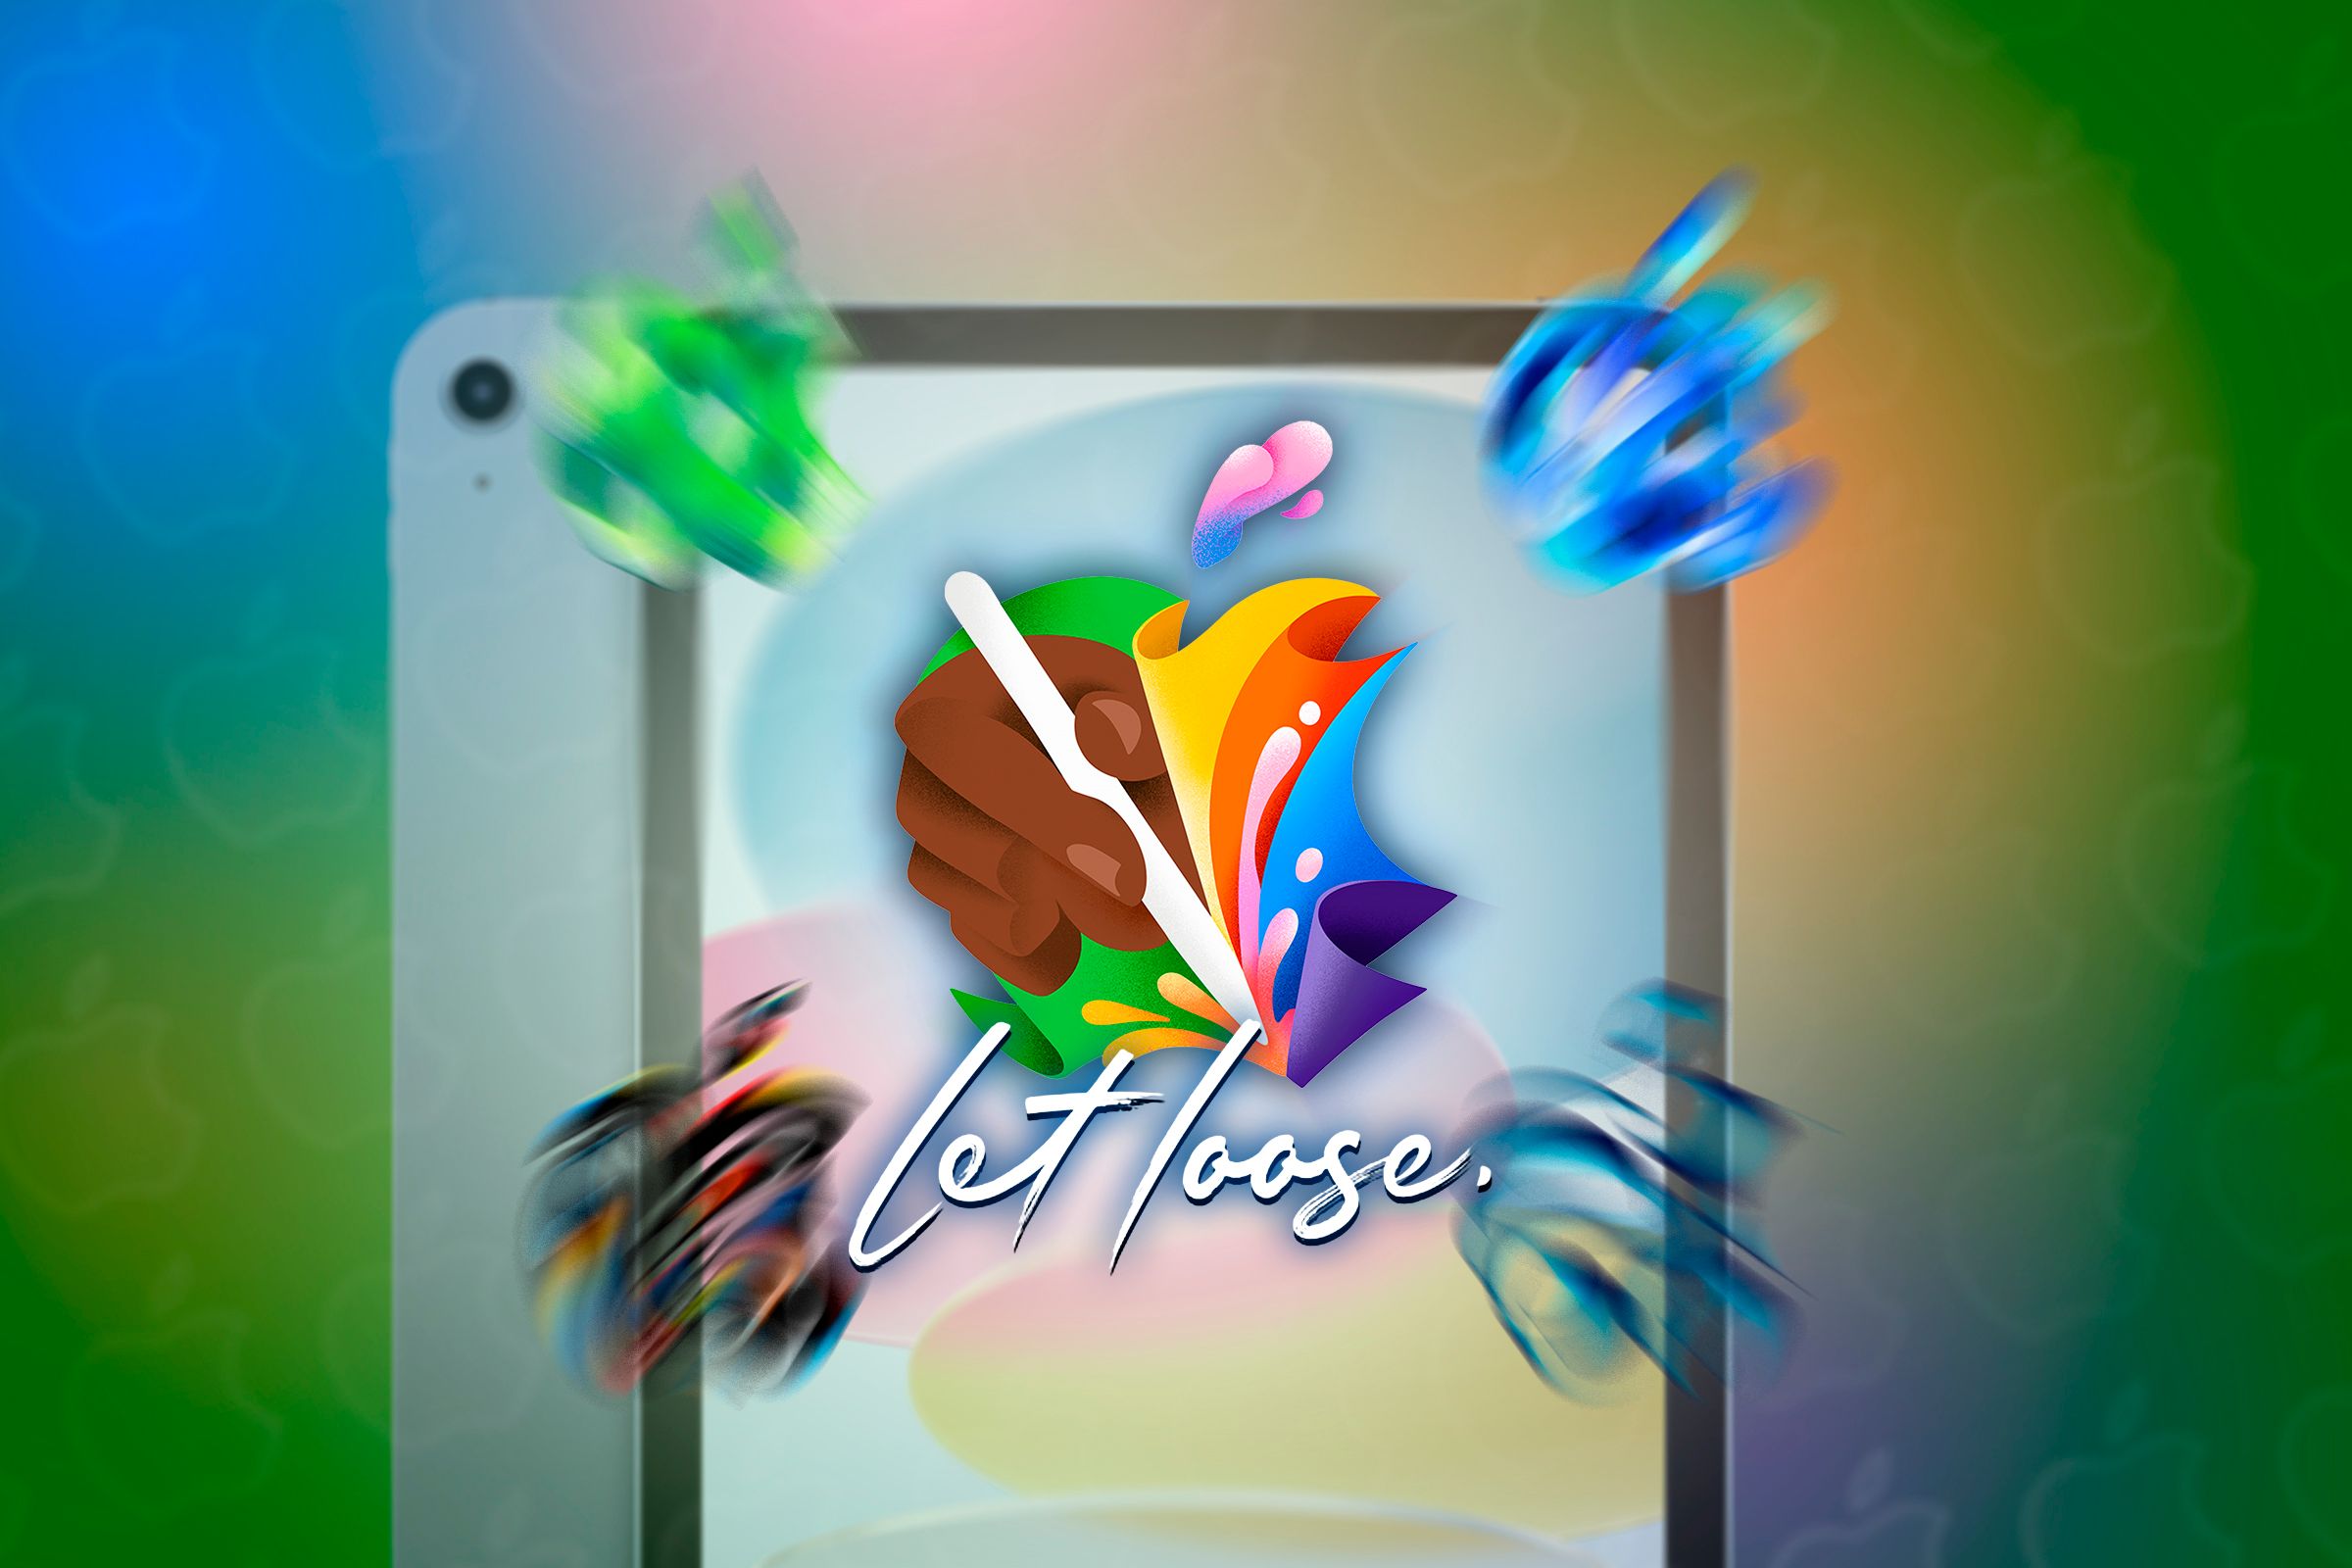 Logo of the Apple Let Loose event, which is an illustration of an apple with a hand holding the Apple Pencil and the text 'let loose' below and an Ipad in the background.